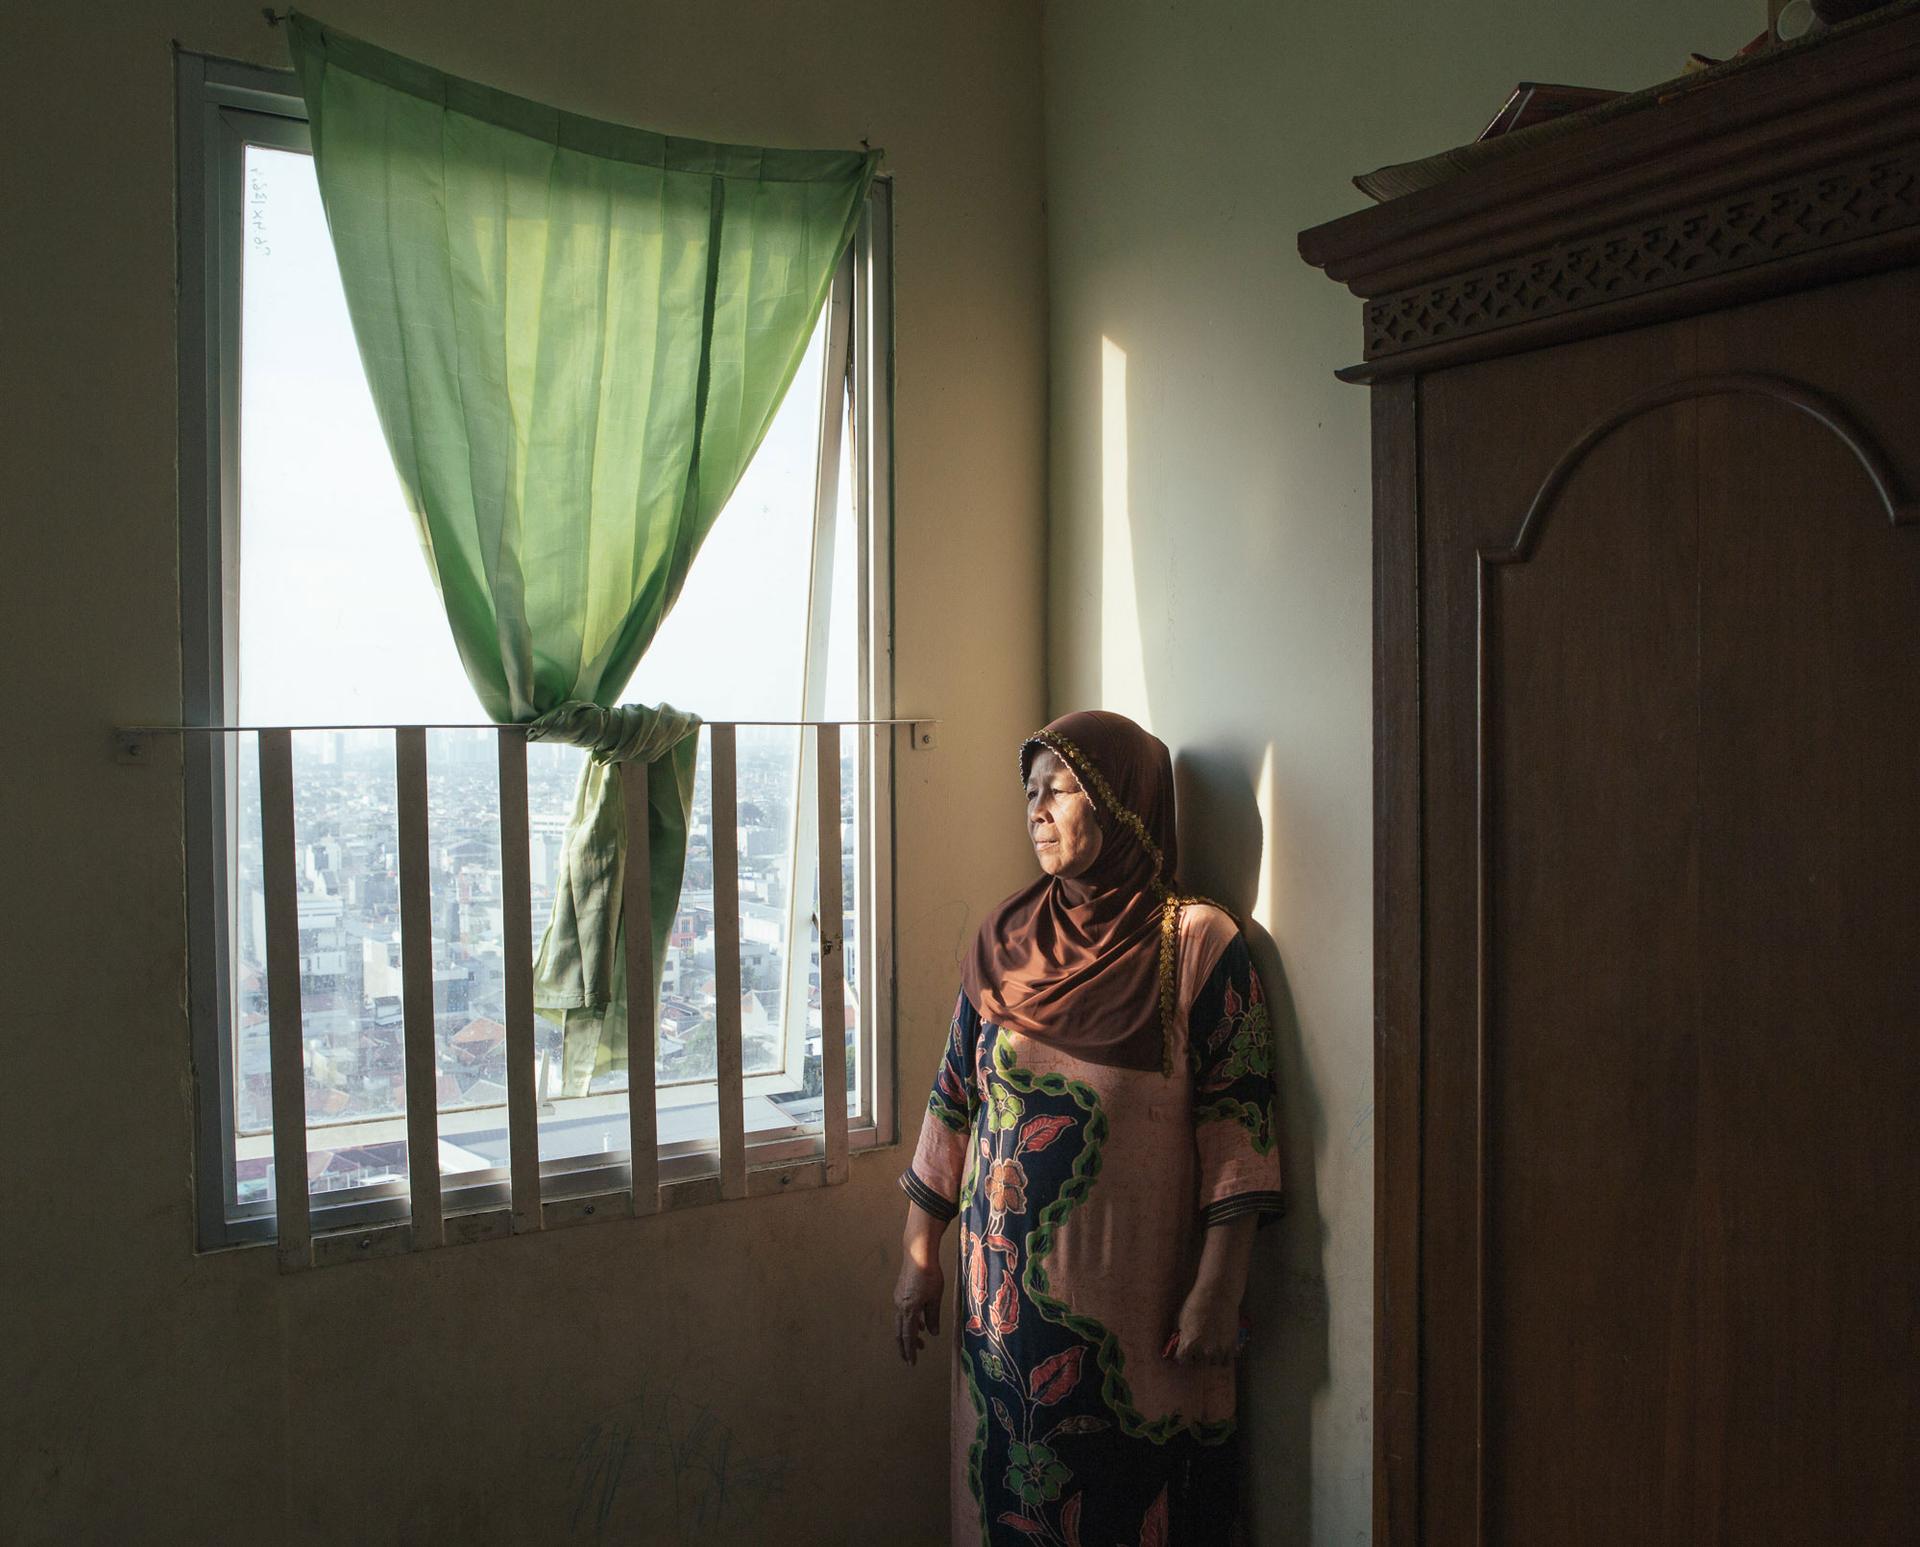 Former riverbank resident Syafitriani now lives in a subsidized apartment after being evicted from her home to make way for flod control projects. She says she lost most of her livelihood in the move and is having trouble paying the rent.